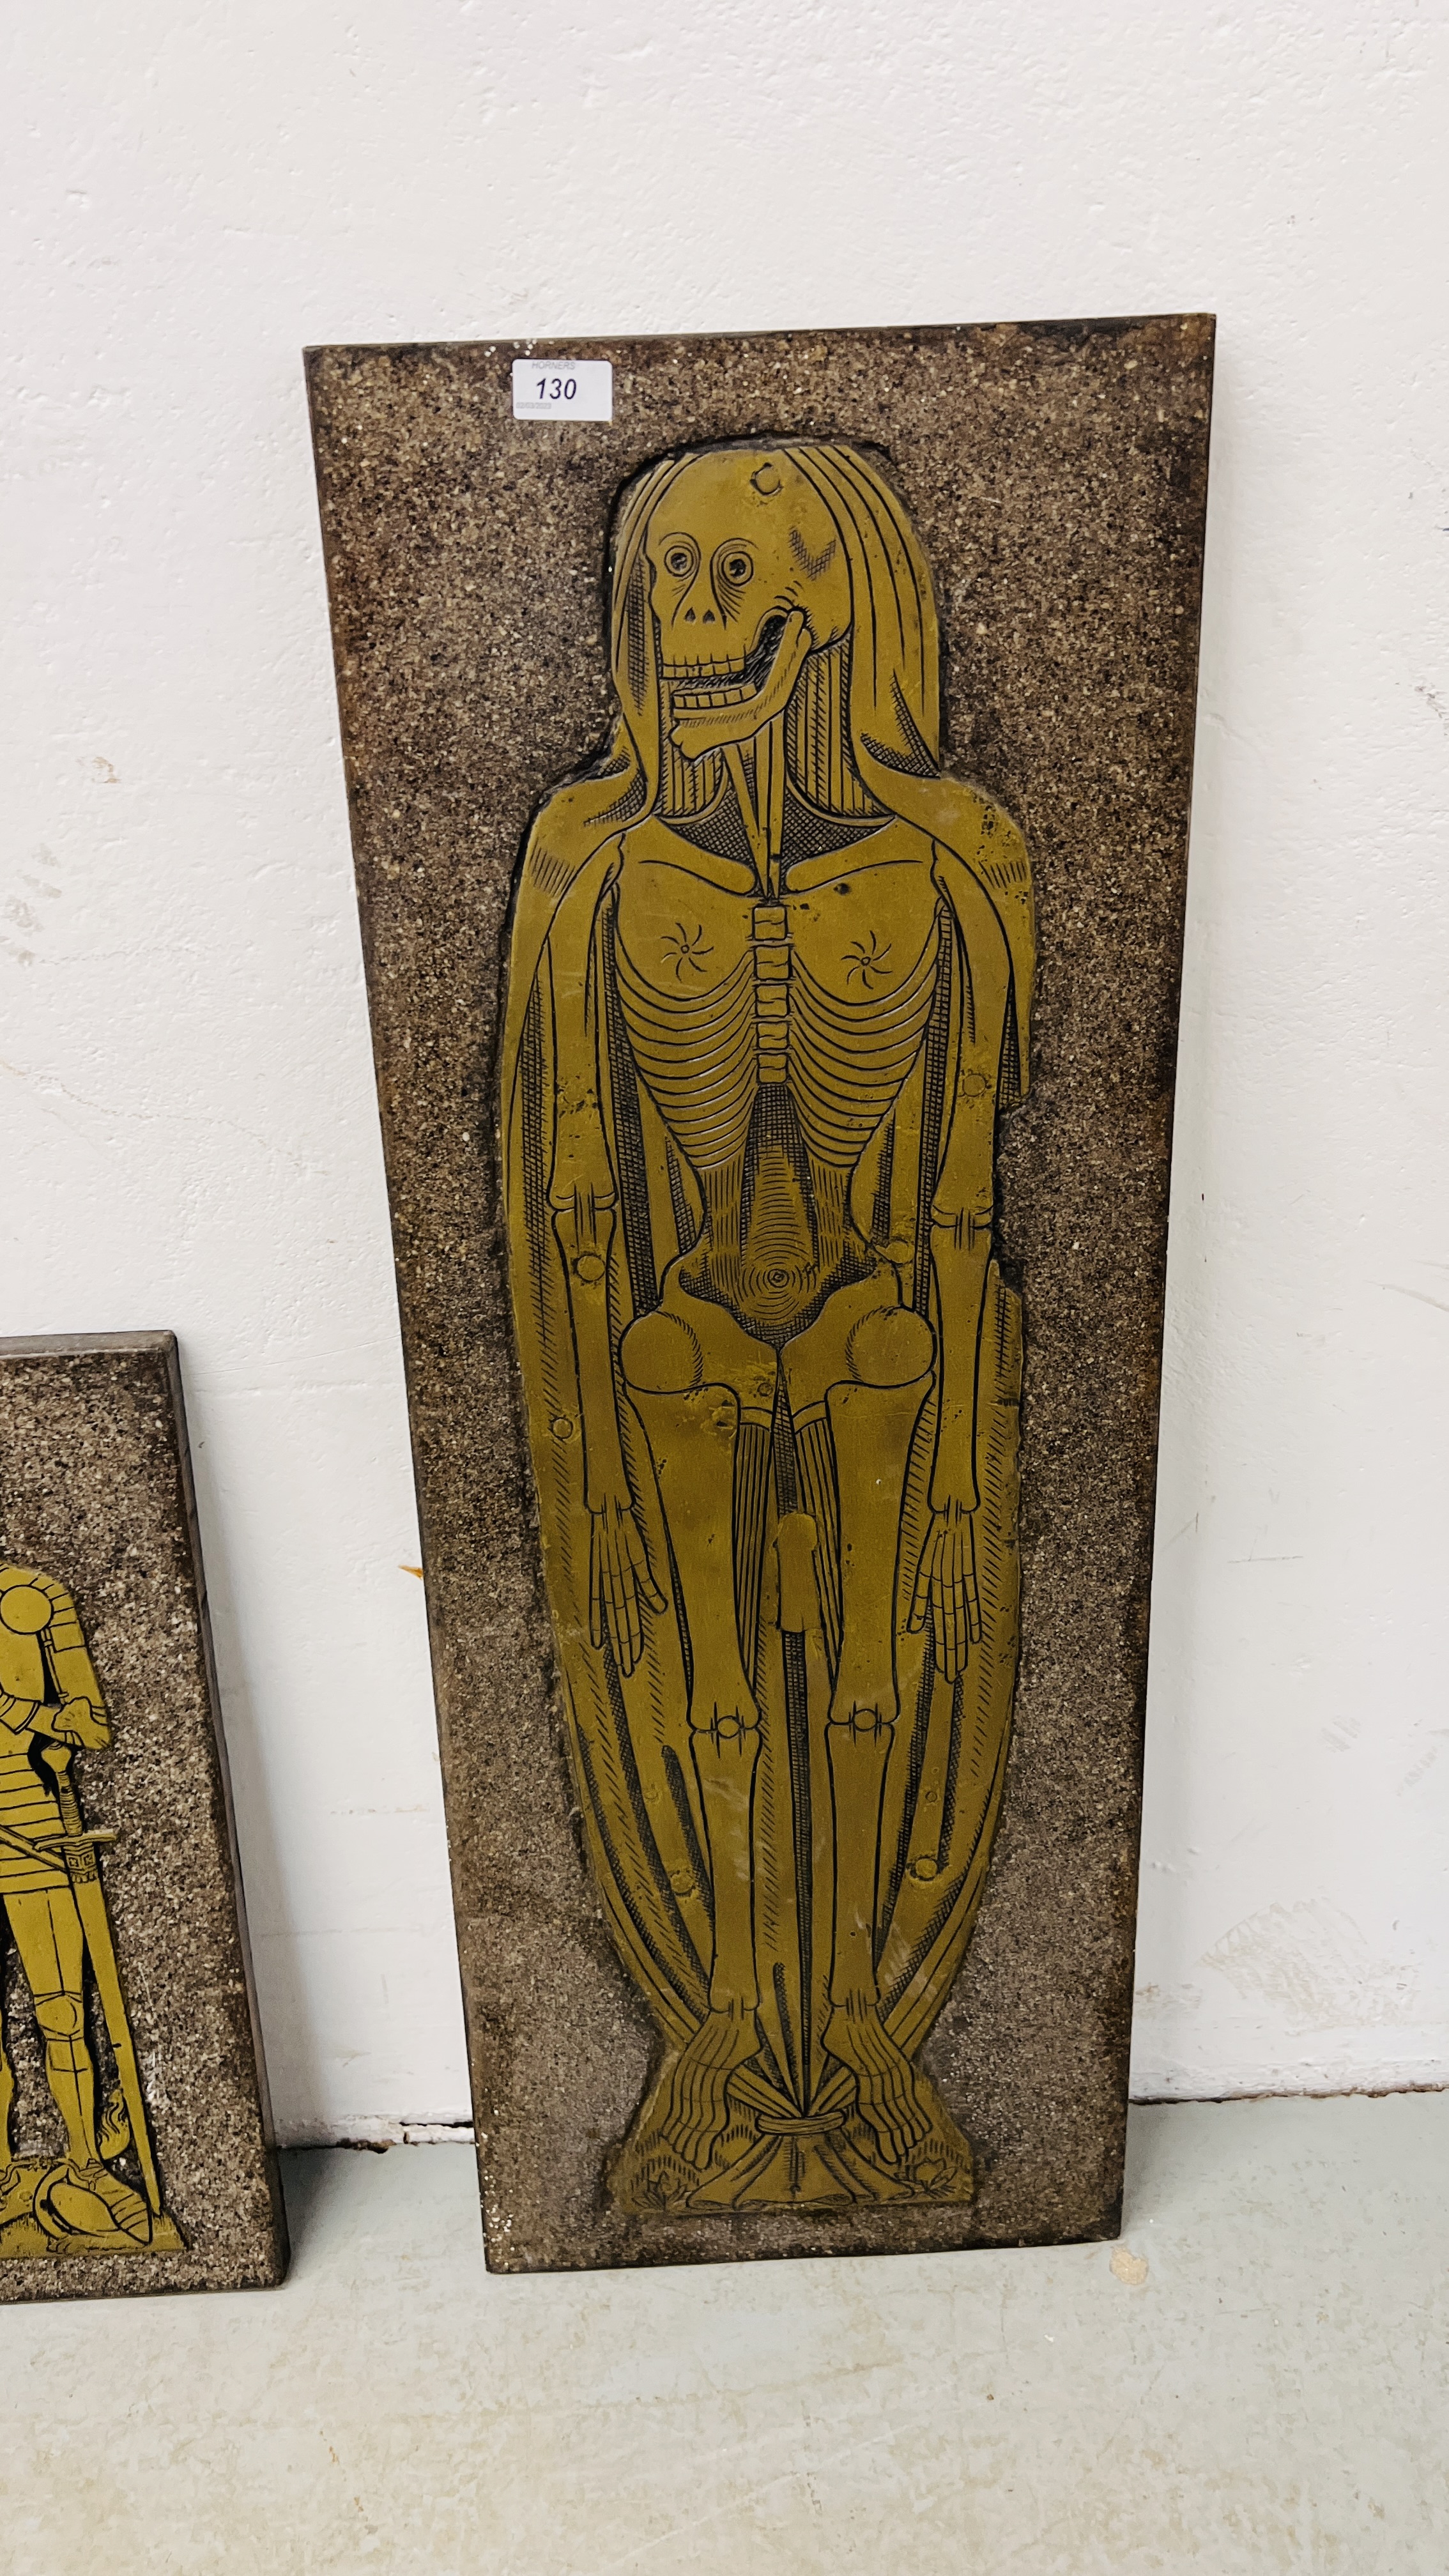 A COLLECTION OF 5 BRASS EFFECT RUBBINGS TO INCLUDE A KNIGHT, MUMMY ETC. 100CM. H. 31CM. W. - Image 6 of 6